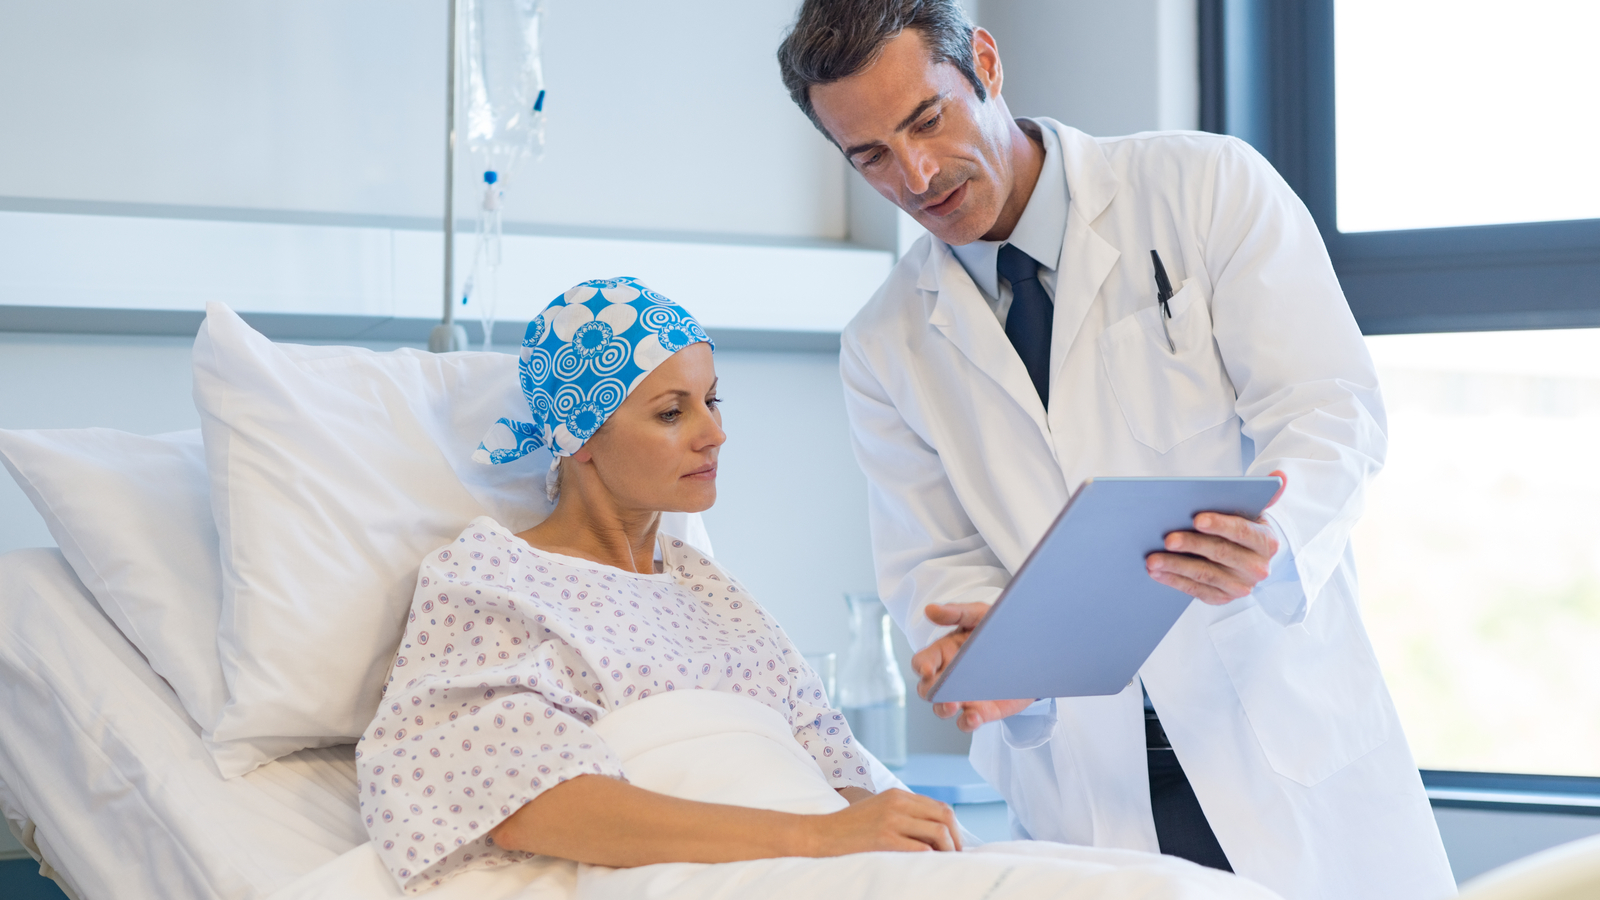 Image of a doctor showing a patient a chart representing HOOK stock.